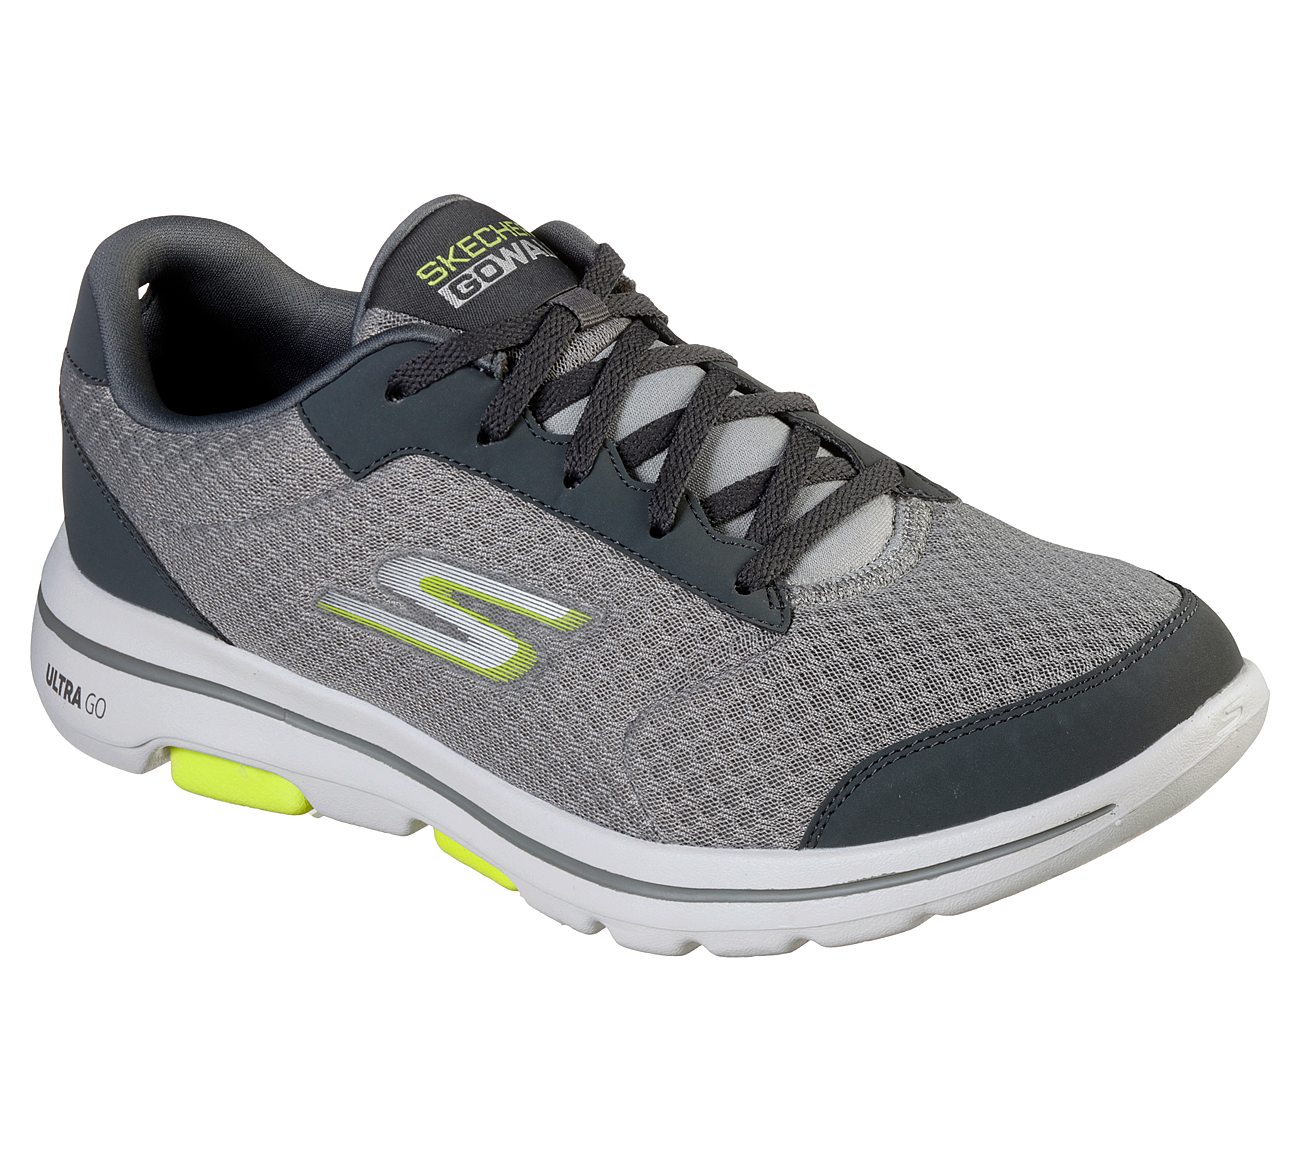 skechers wide fit womens trainers uk